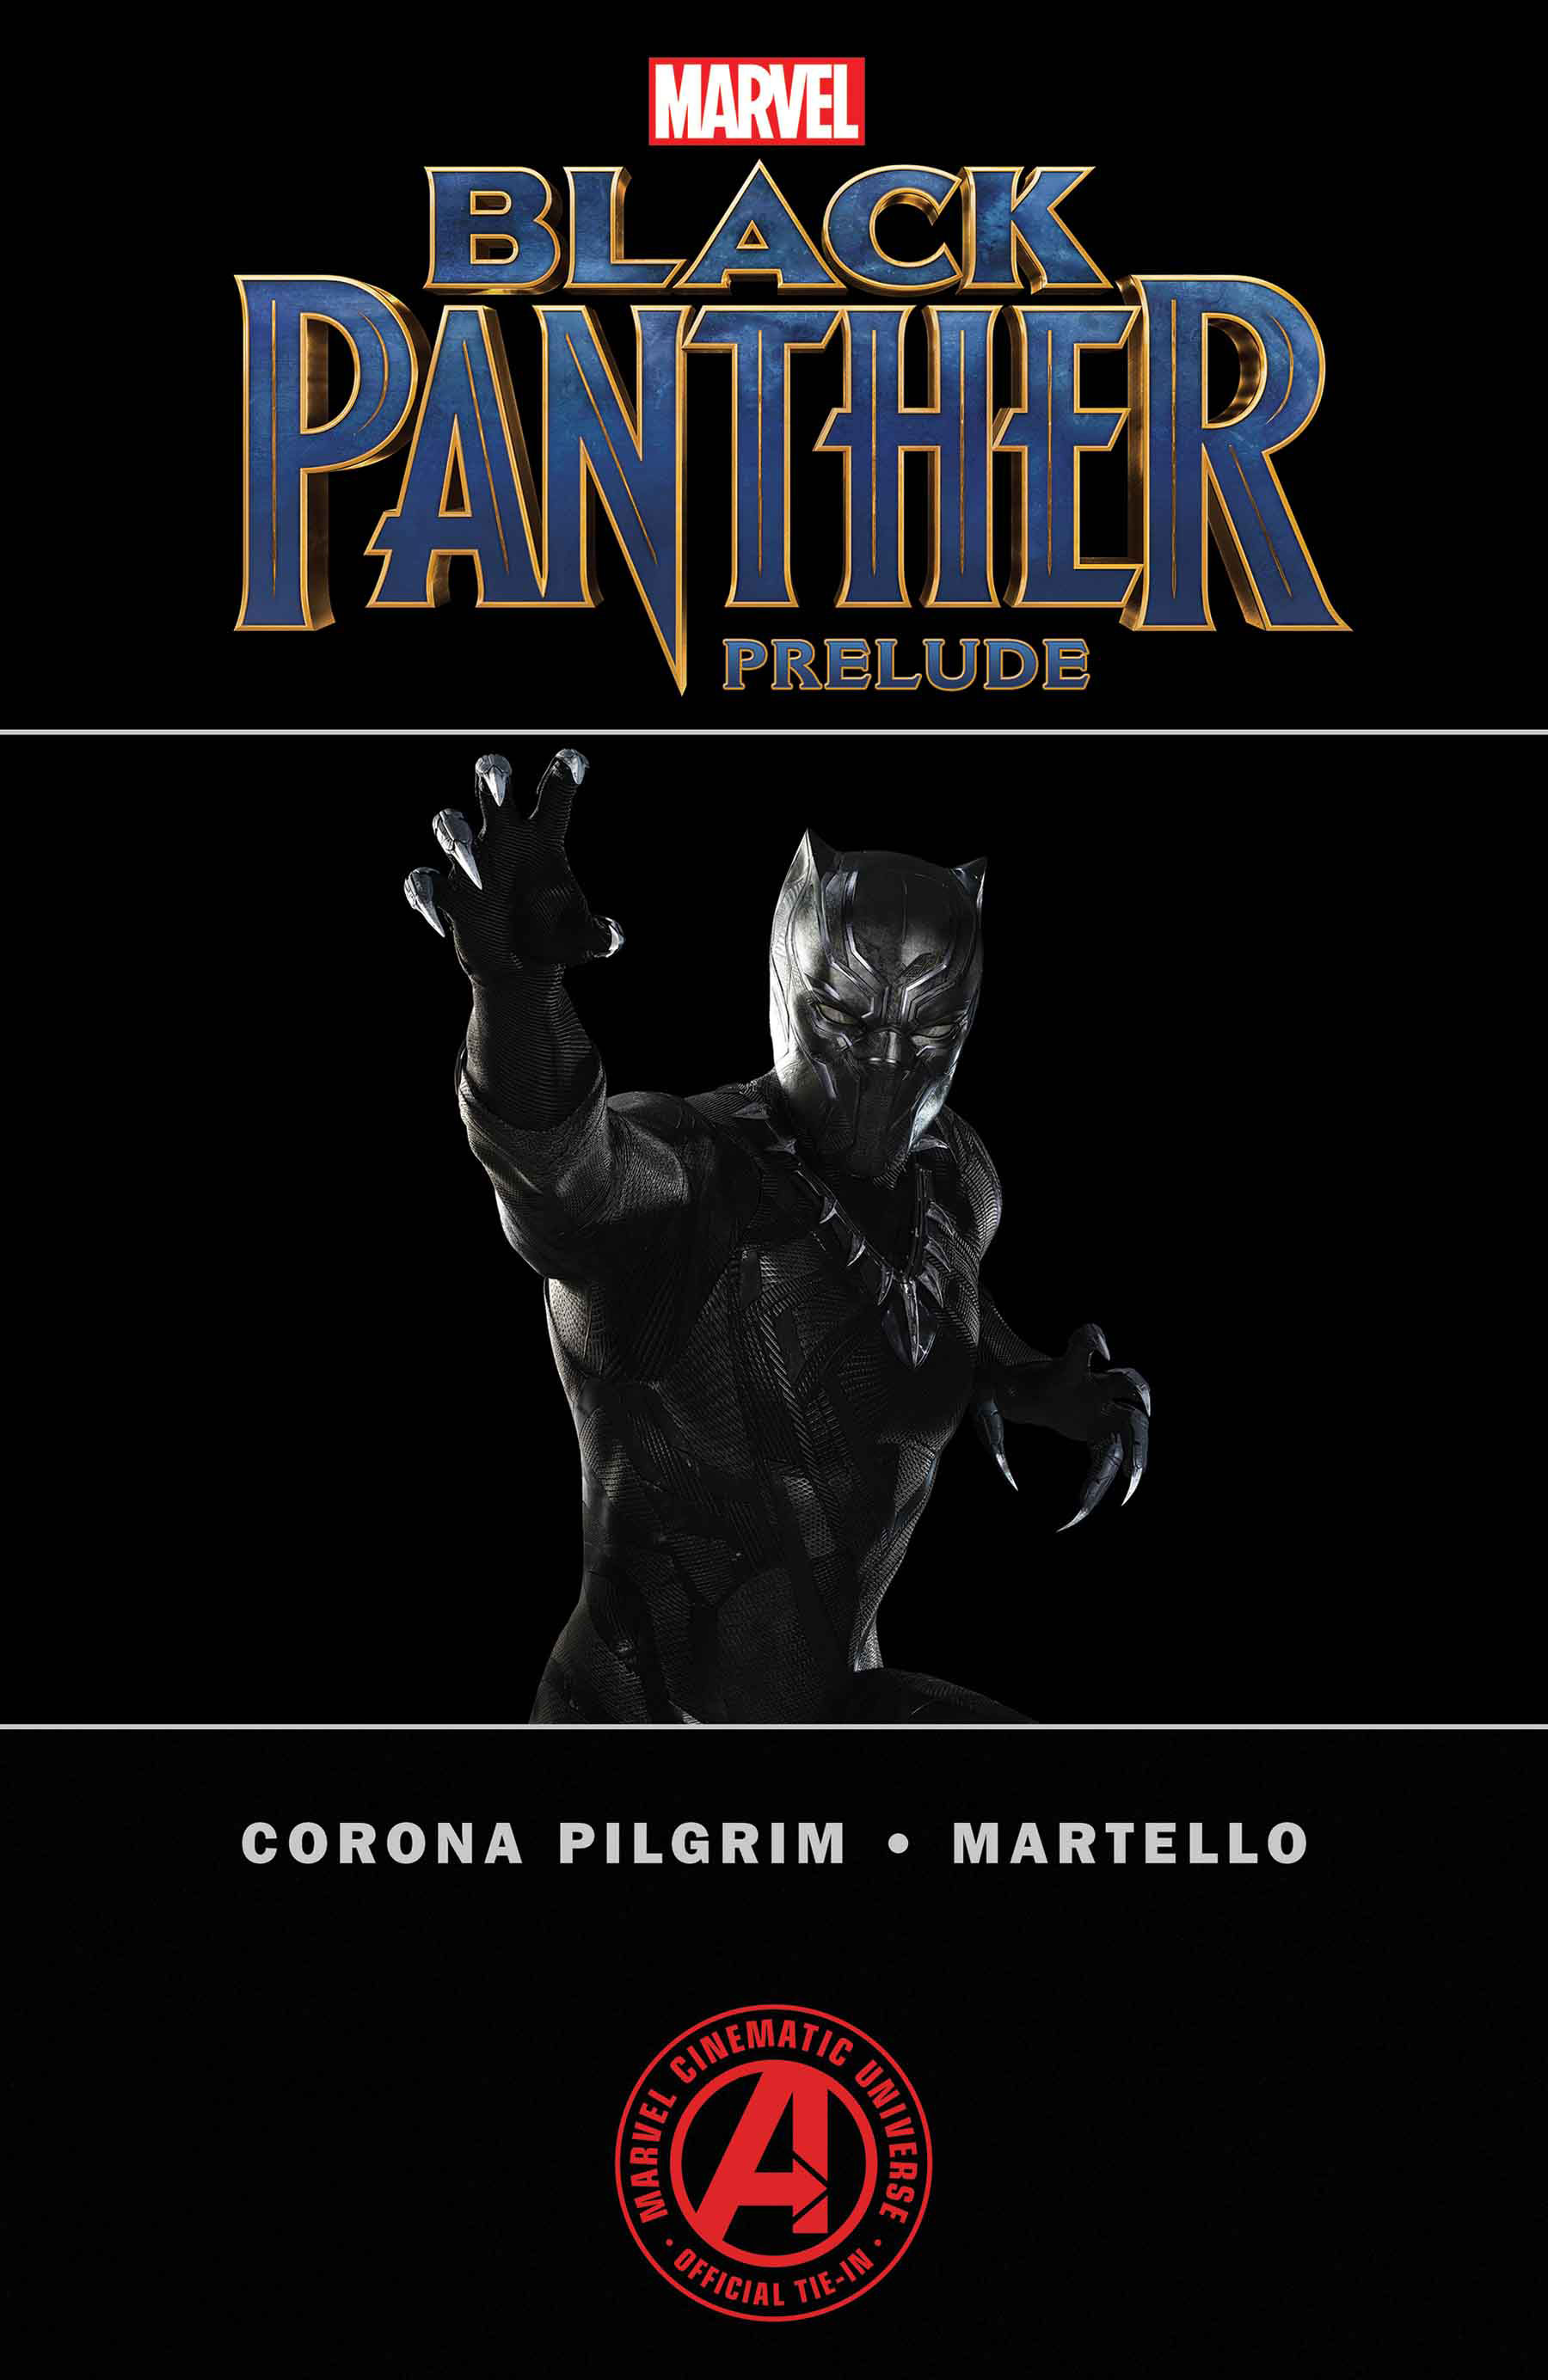 MARVEL’S BLACK PANTHER PRELUDE #1 (of 2)